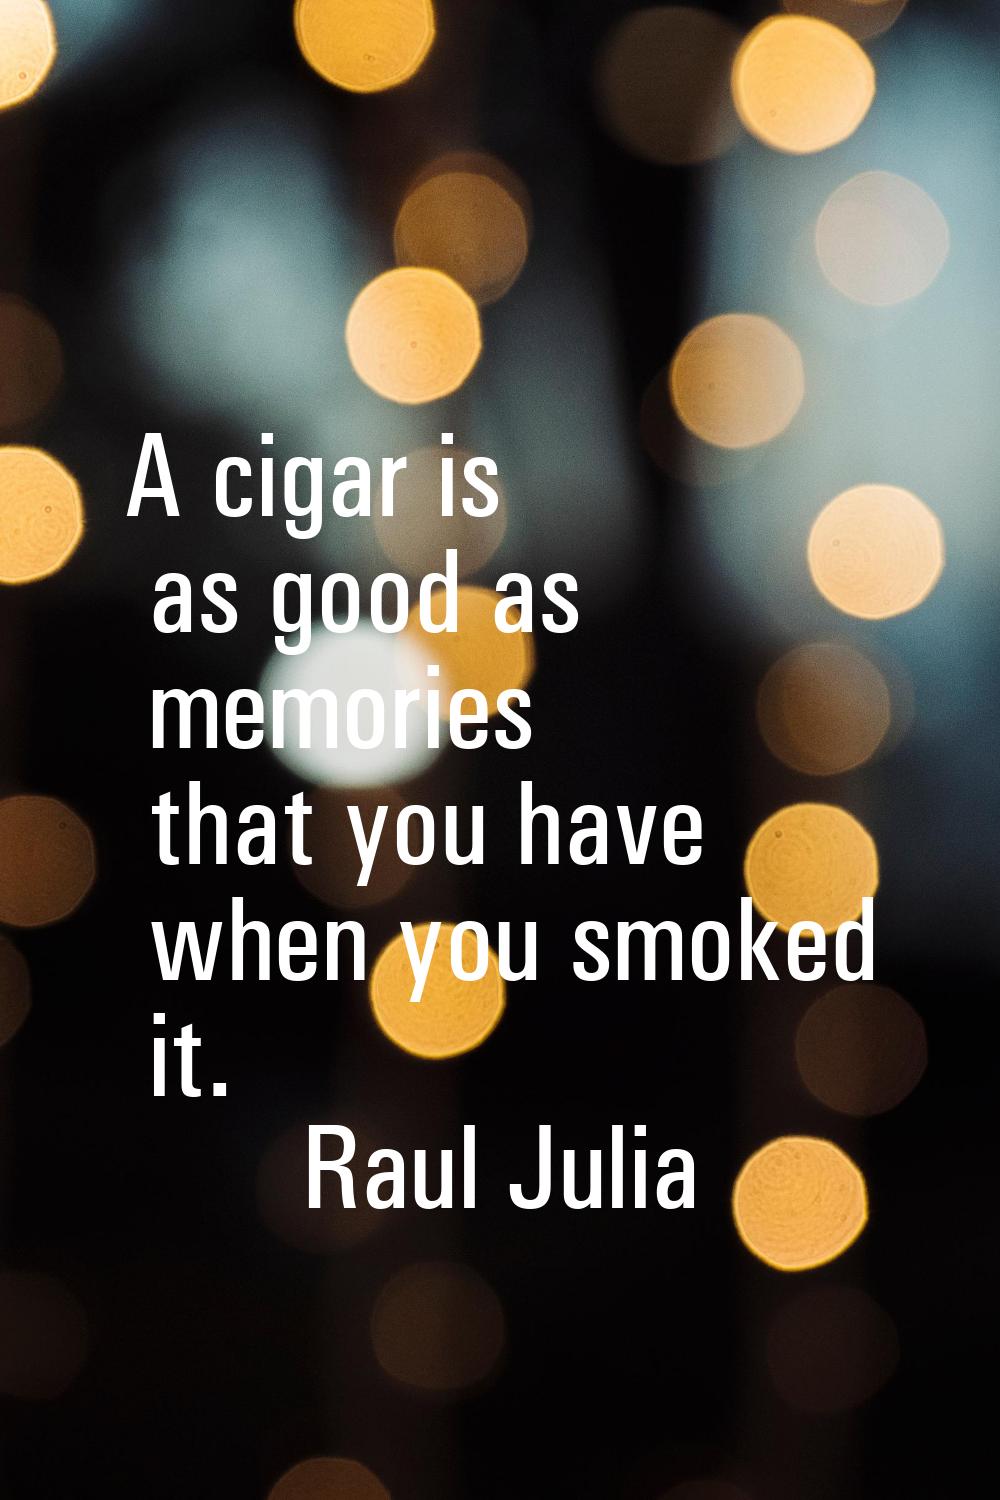 A cigar is as good as memories that you have when you smoked it.